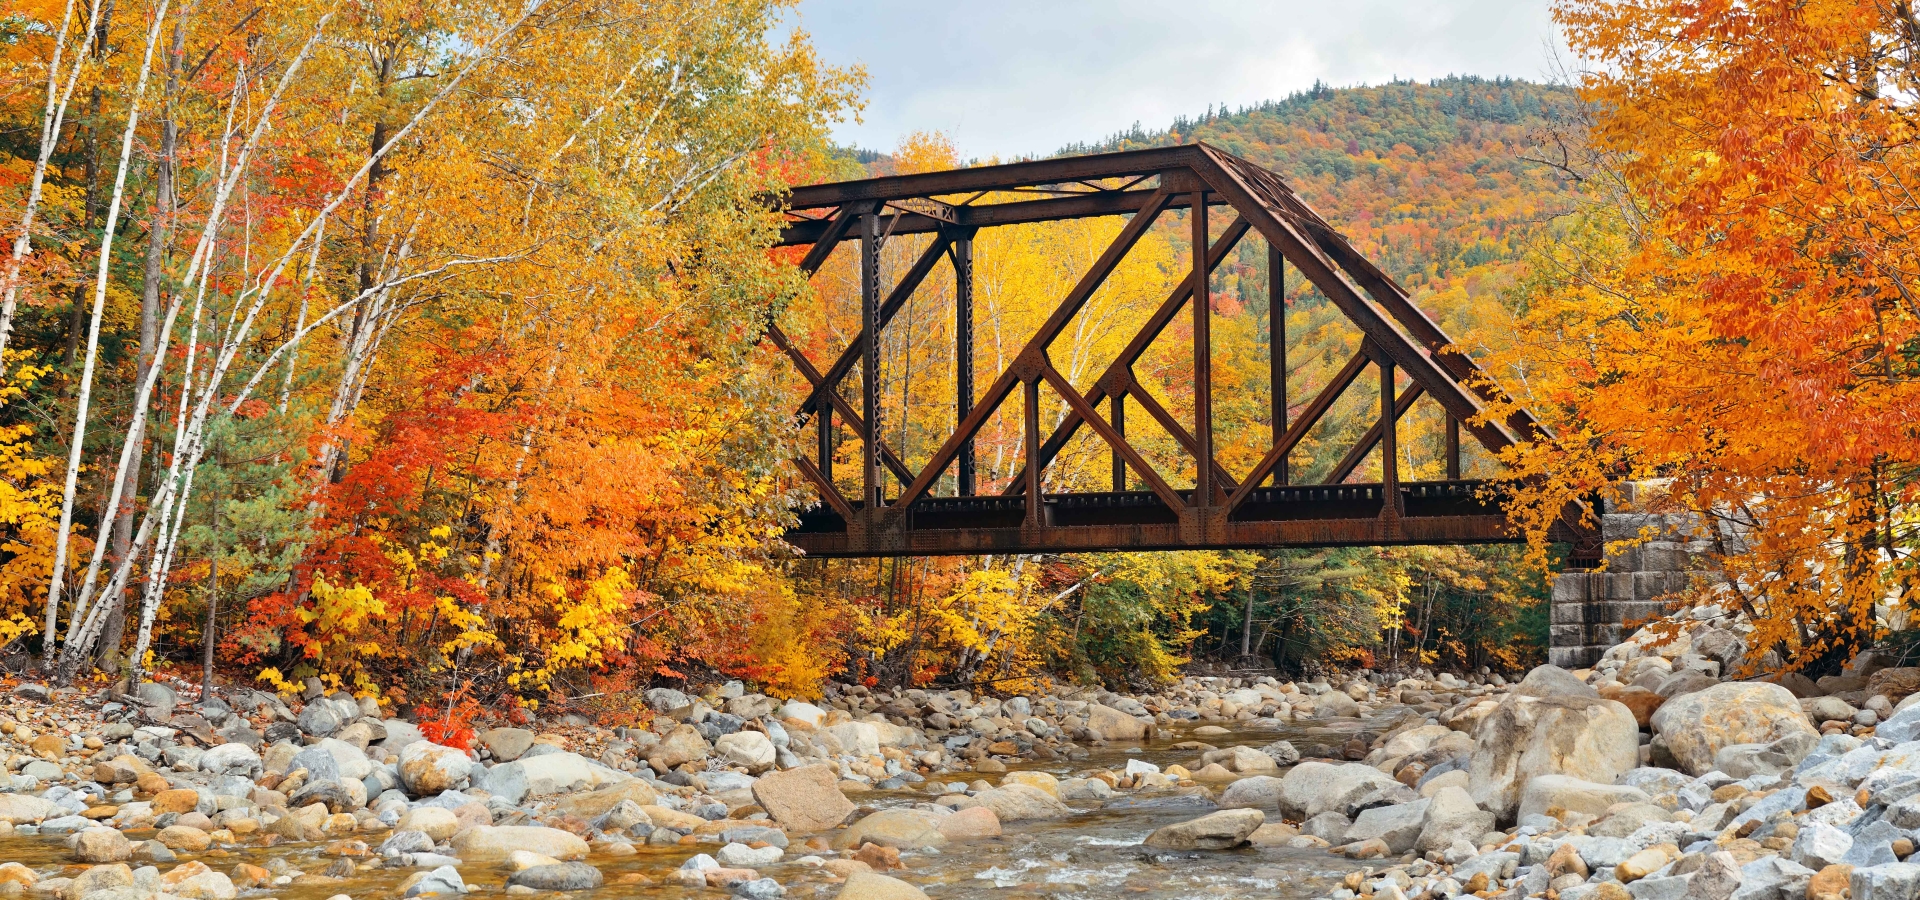 Railway bridge in woods with colorful foliage, White Mountain, NH